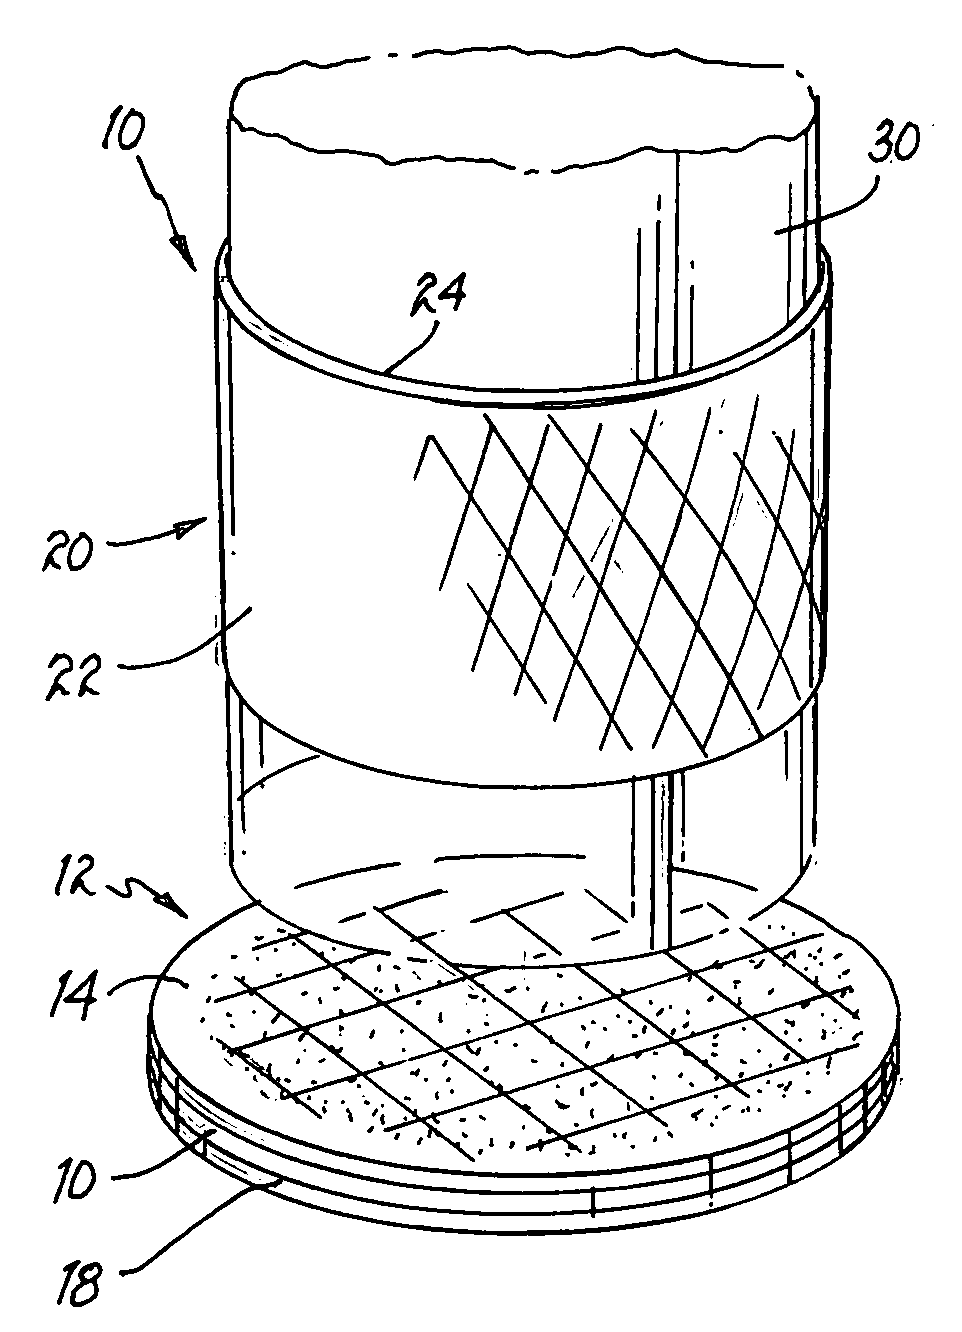 Combination self-adhering beverage coaster and sleeve and method